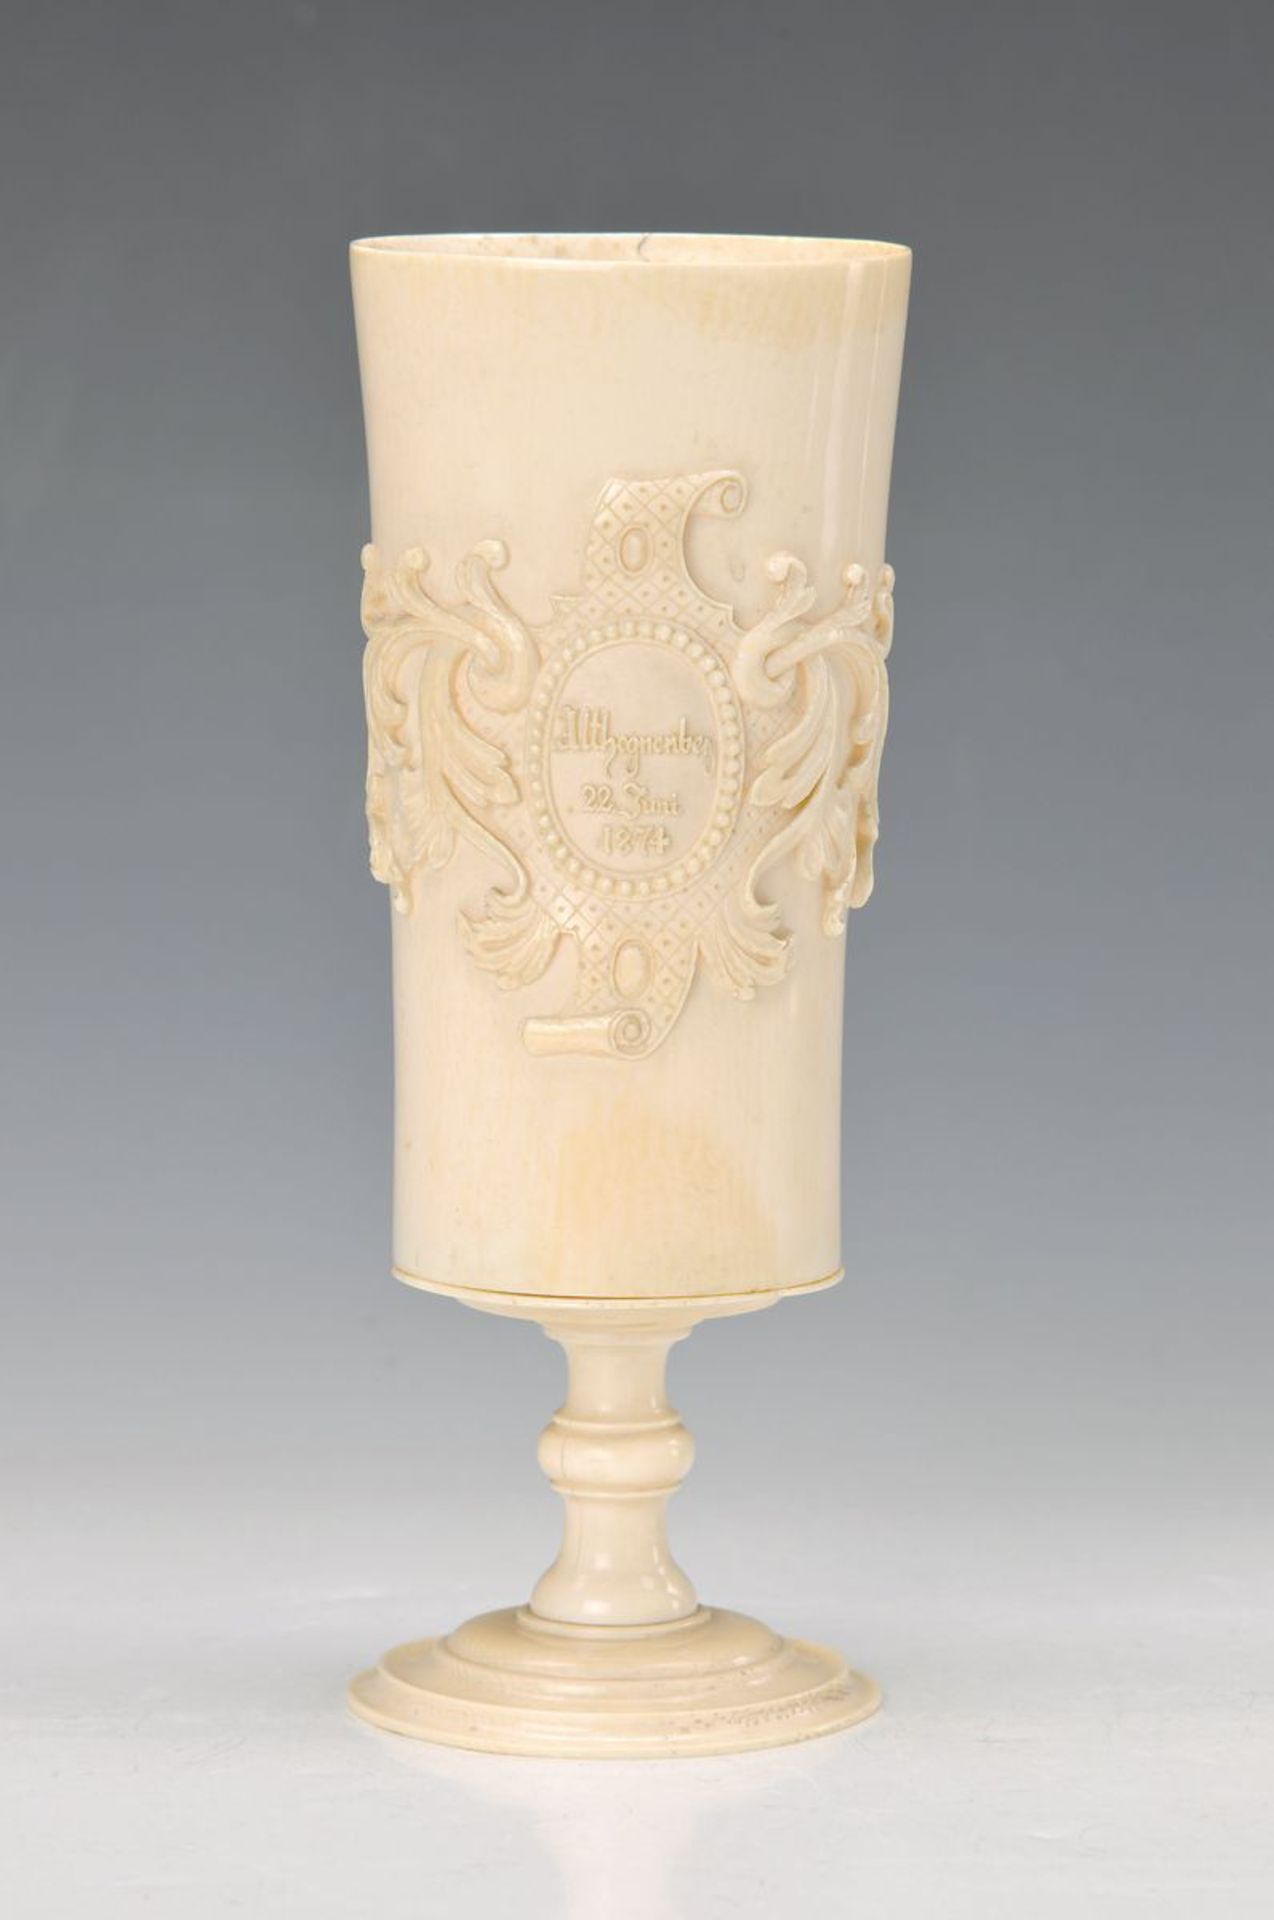 goblet, Althengenberg, dated 22. Juni 1874, Ivory, in the center coat of arms, encircling tendril